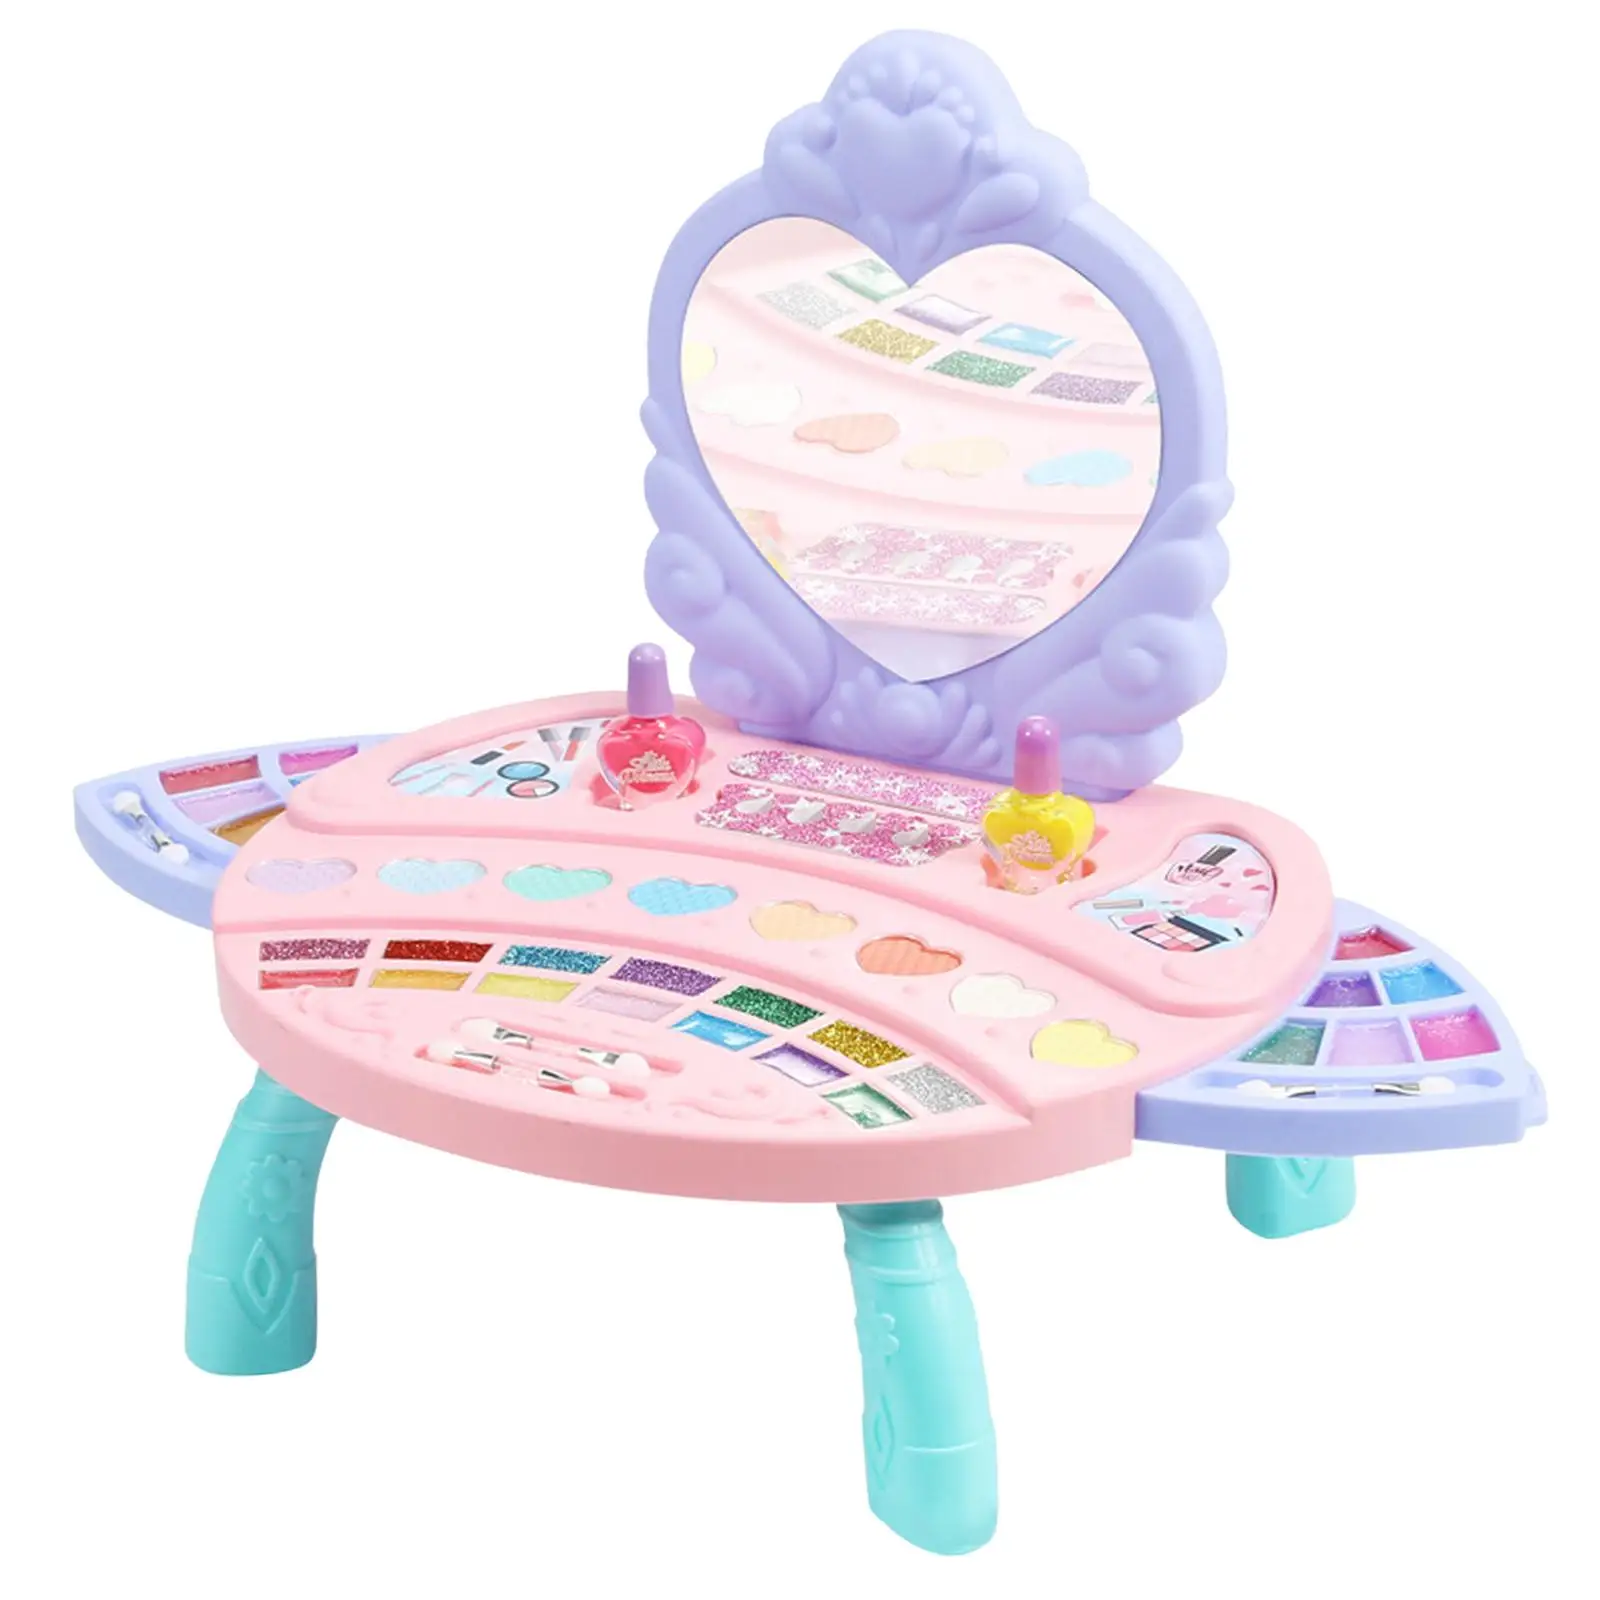 Kids Makeup Kit Makeup Set Mirror Toy for 6~12 Years Olds Children Holiday Gifts